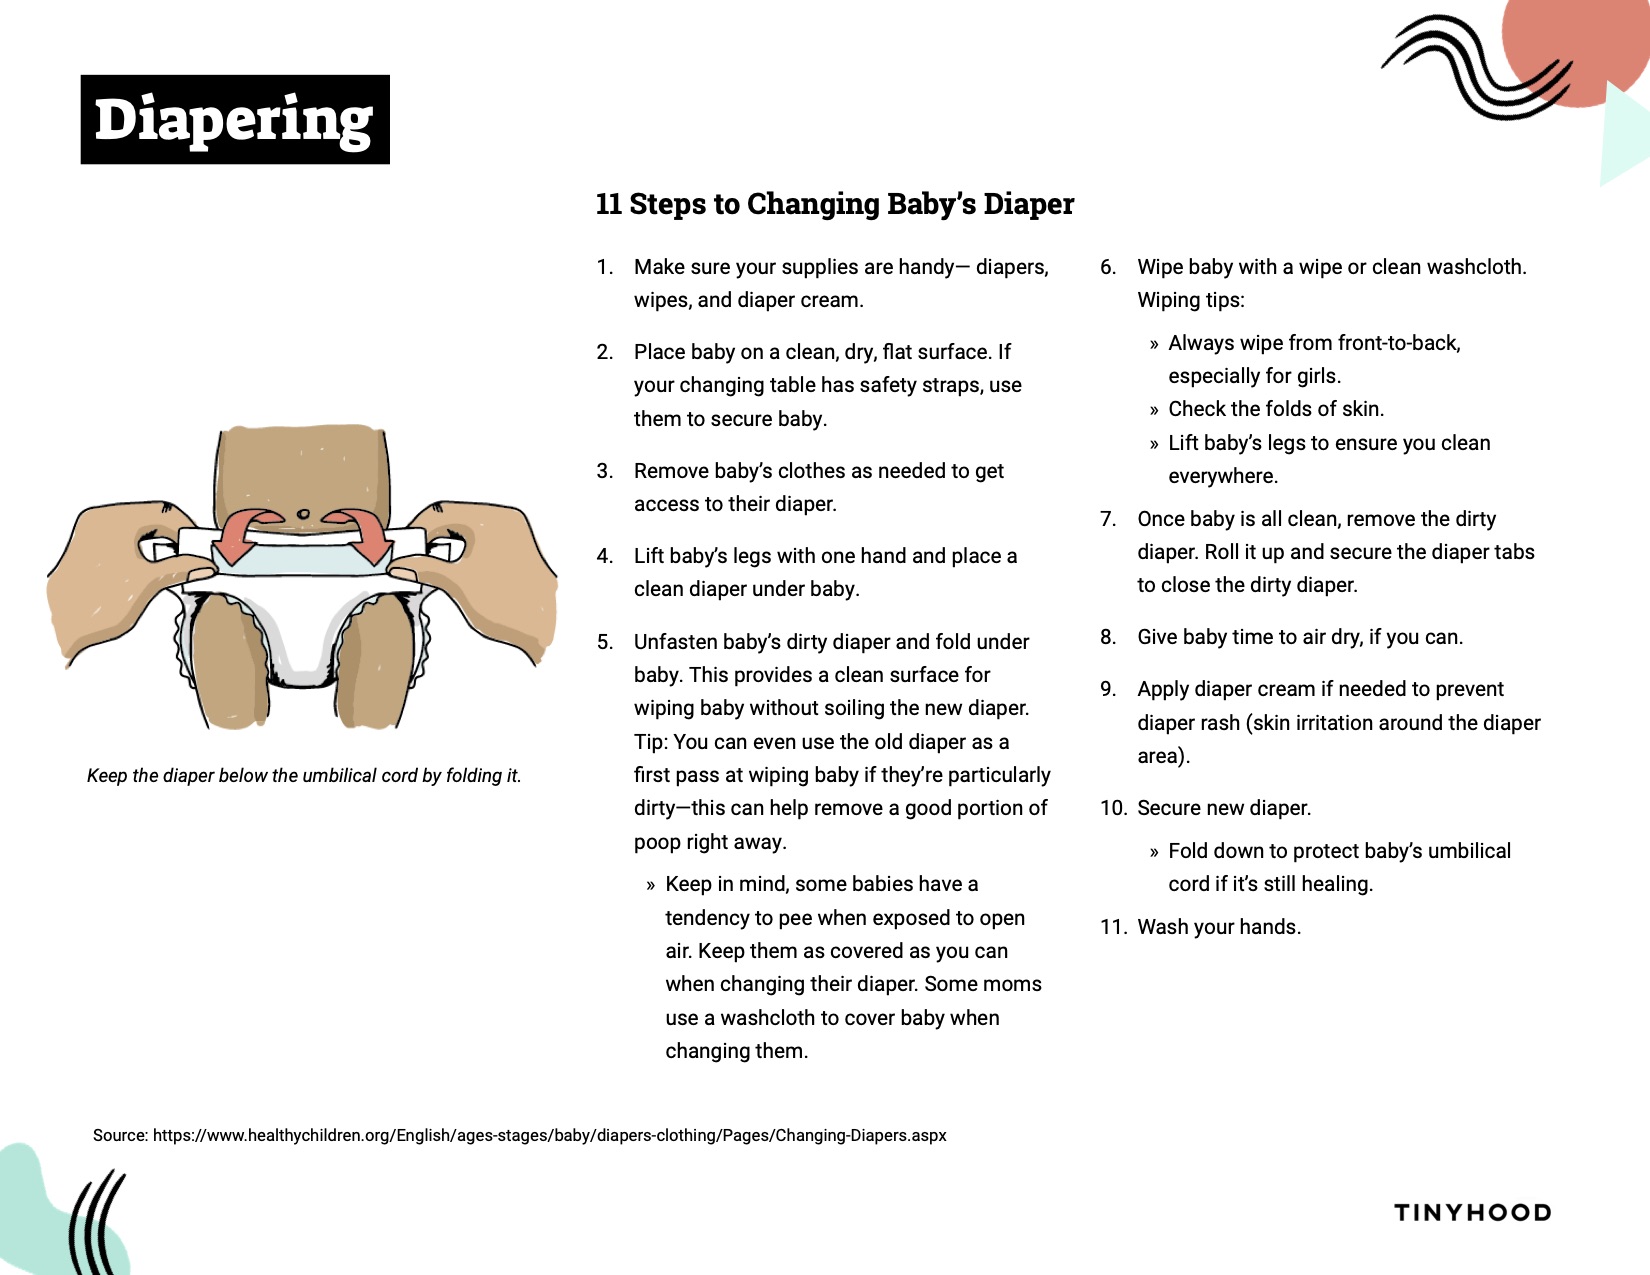 How to Change A Diaper Step-by-Step